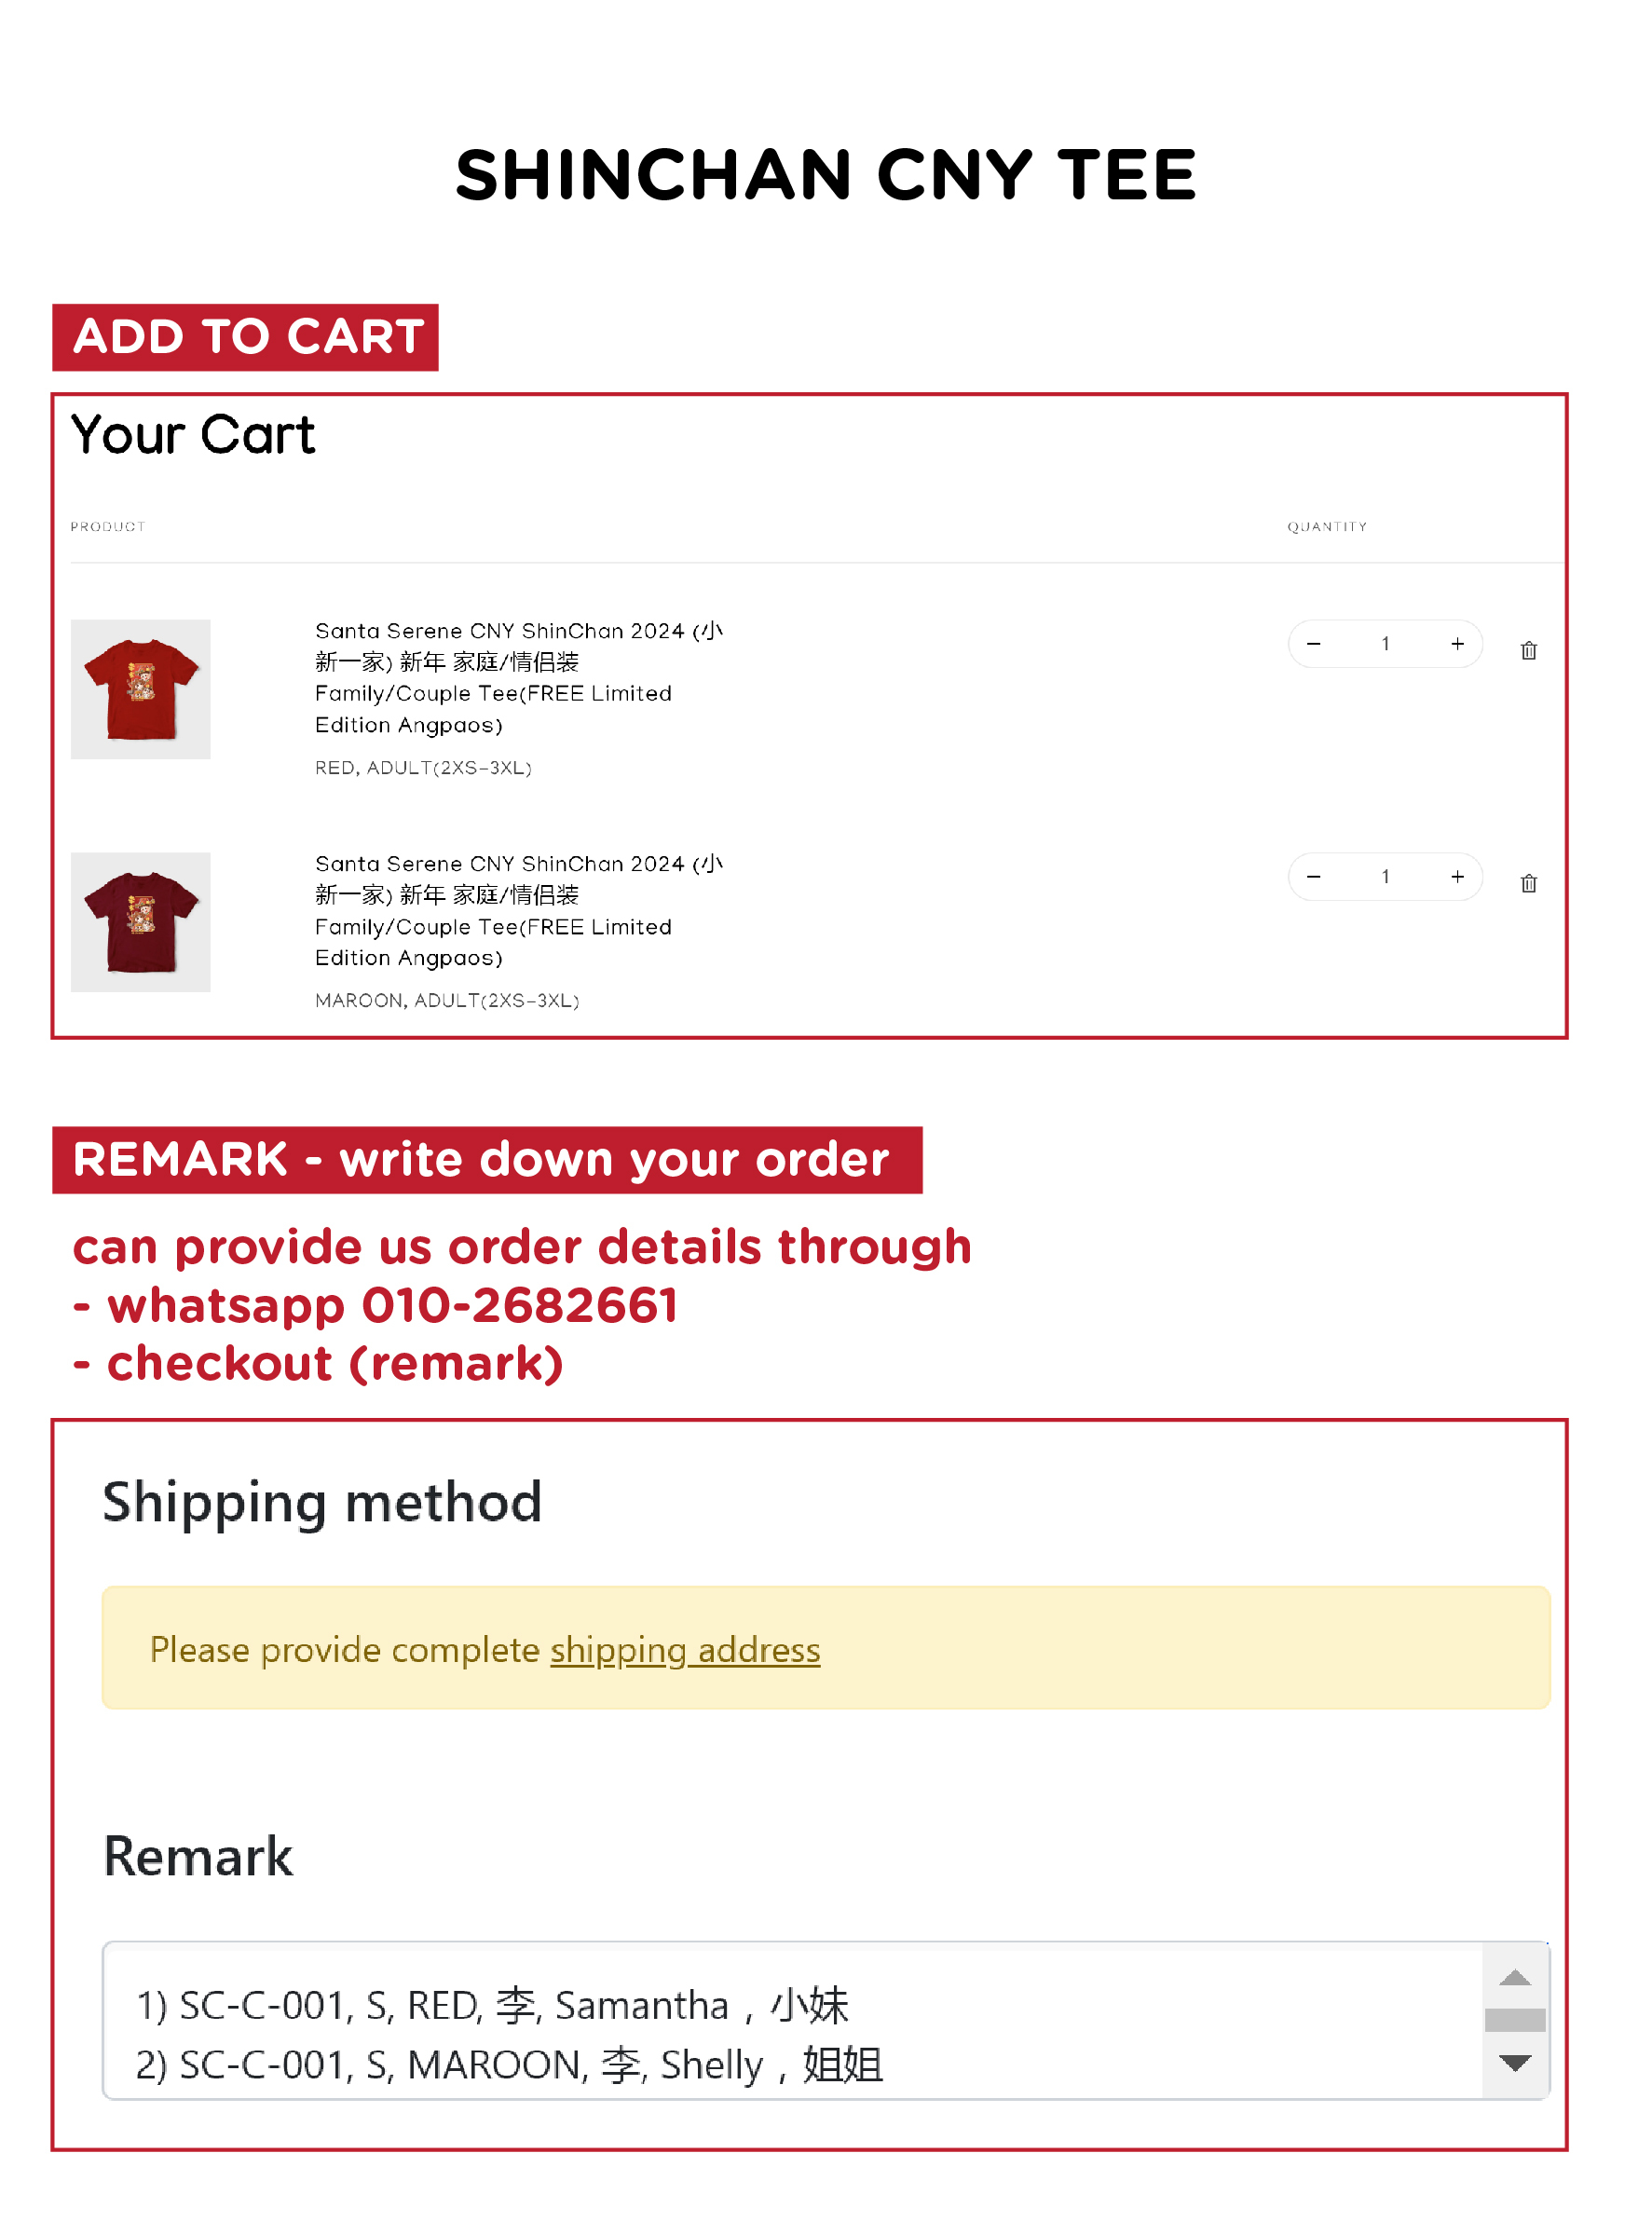 HOW TO PLACE ORDER-SHINCHAN CNY TEE